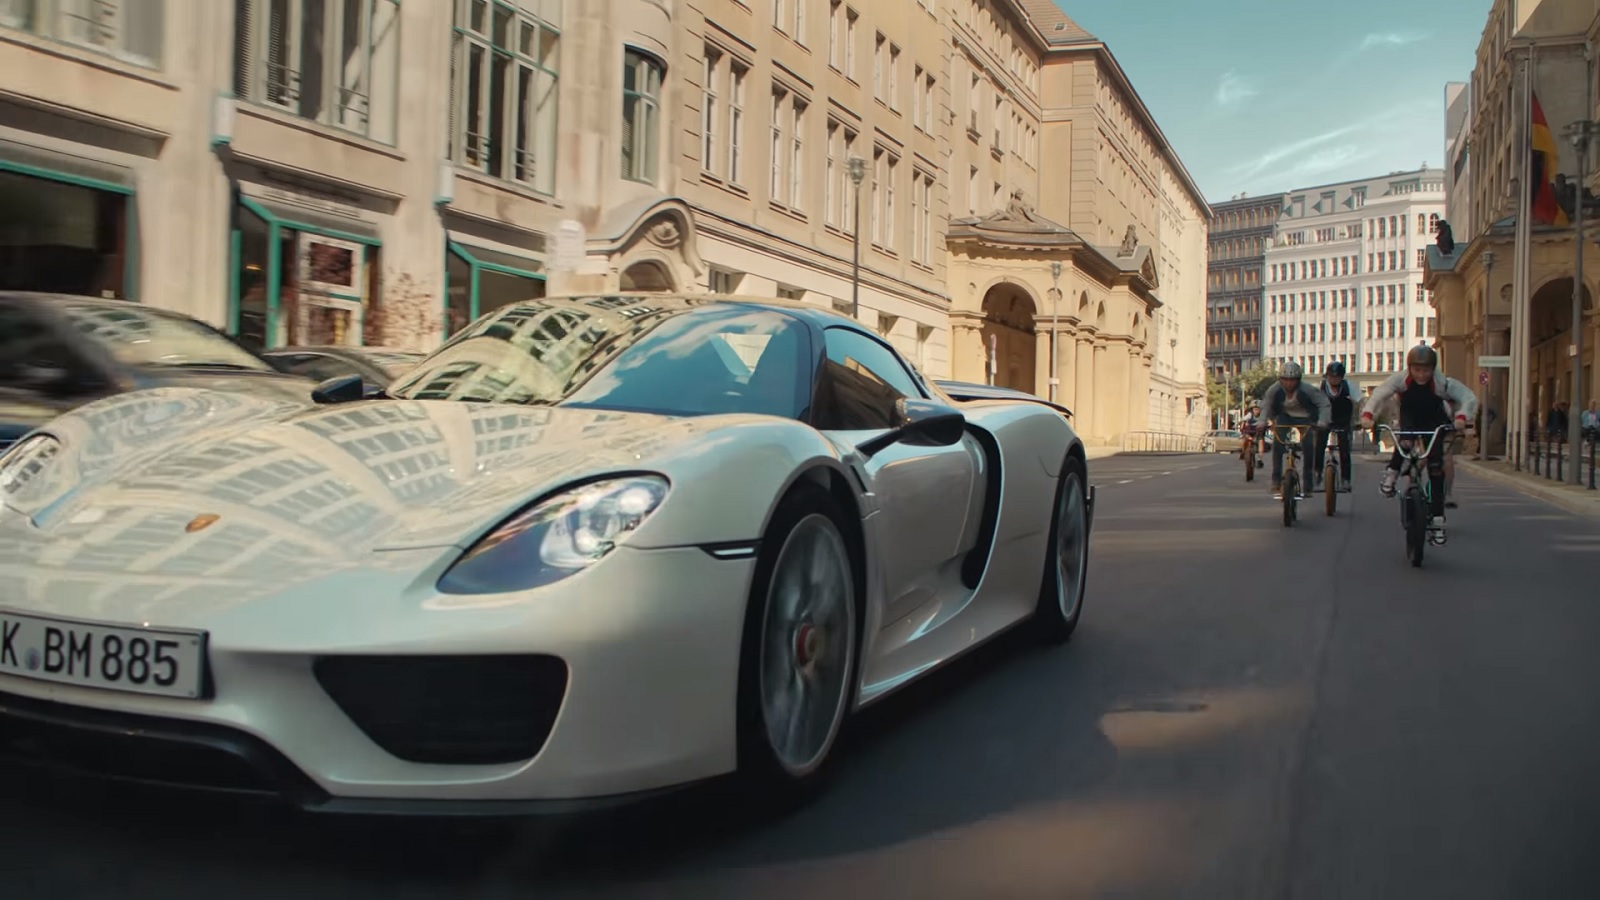 Why Did VW Use Super Sports Cars to Promote Its Own Vehicles?